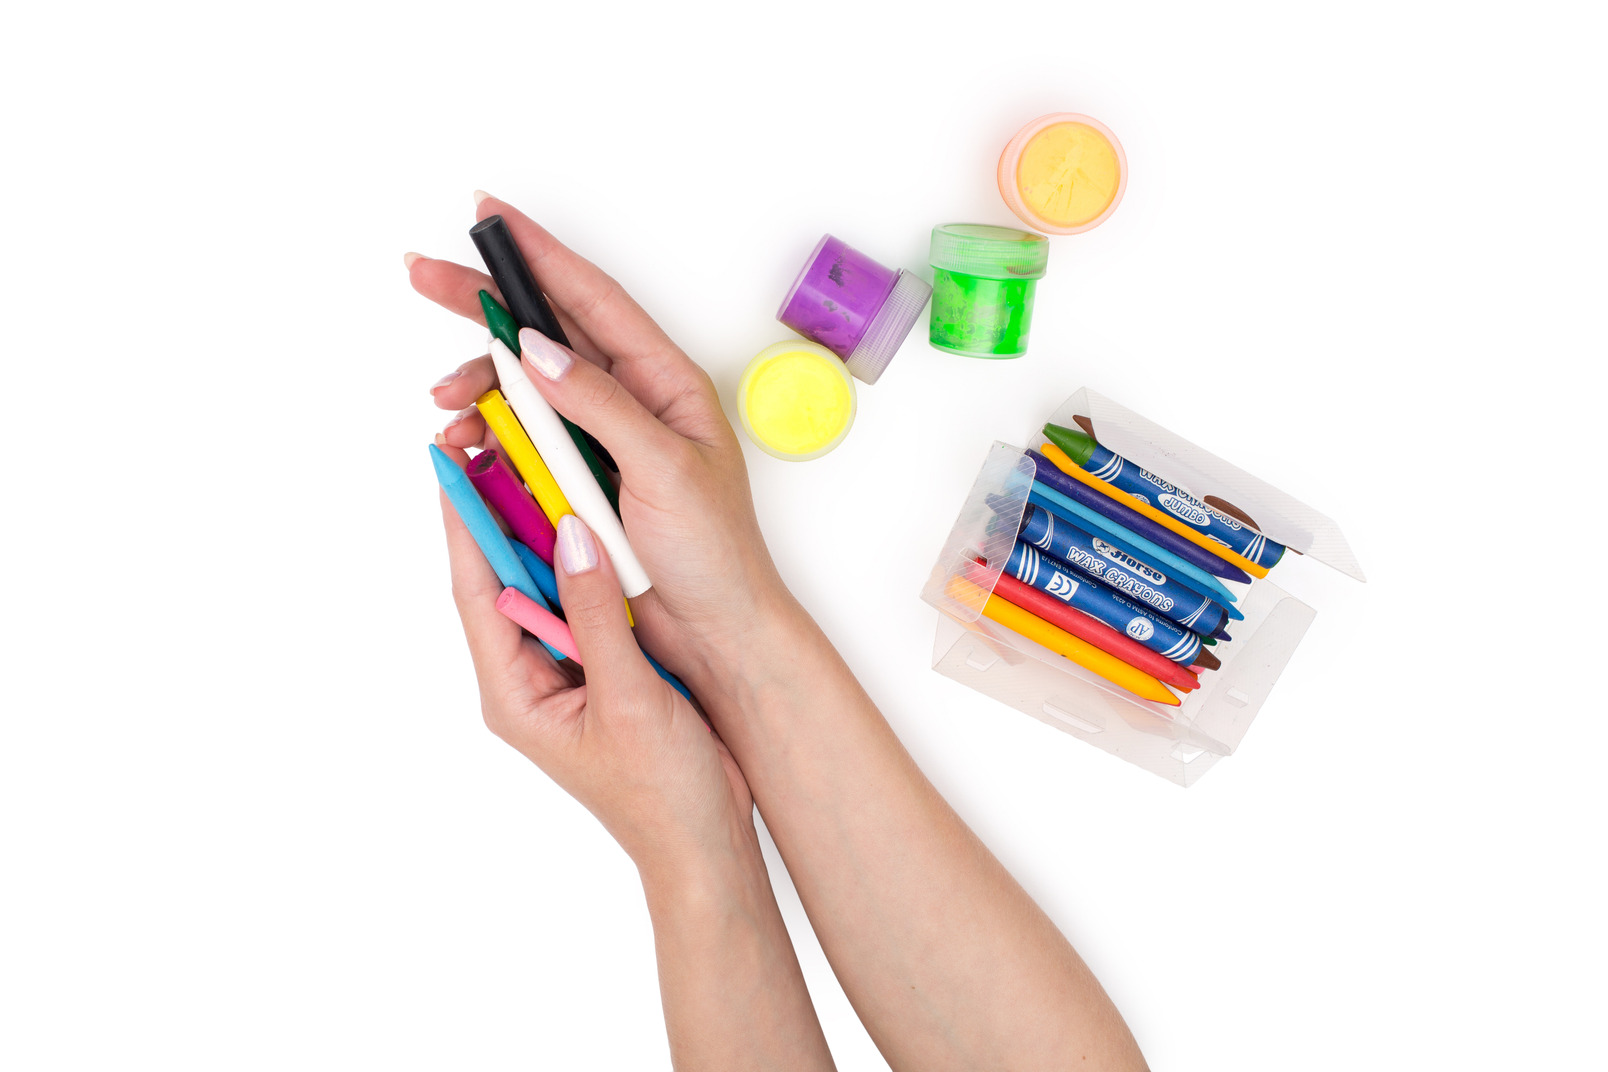 Hands holding multicolored crayons